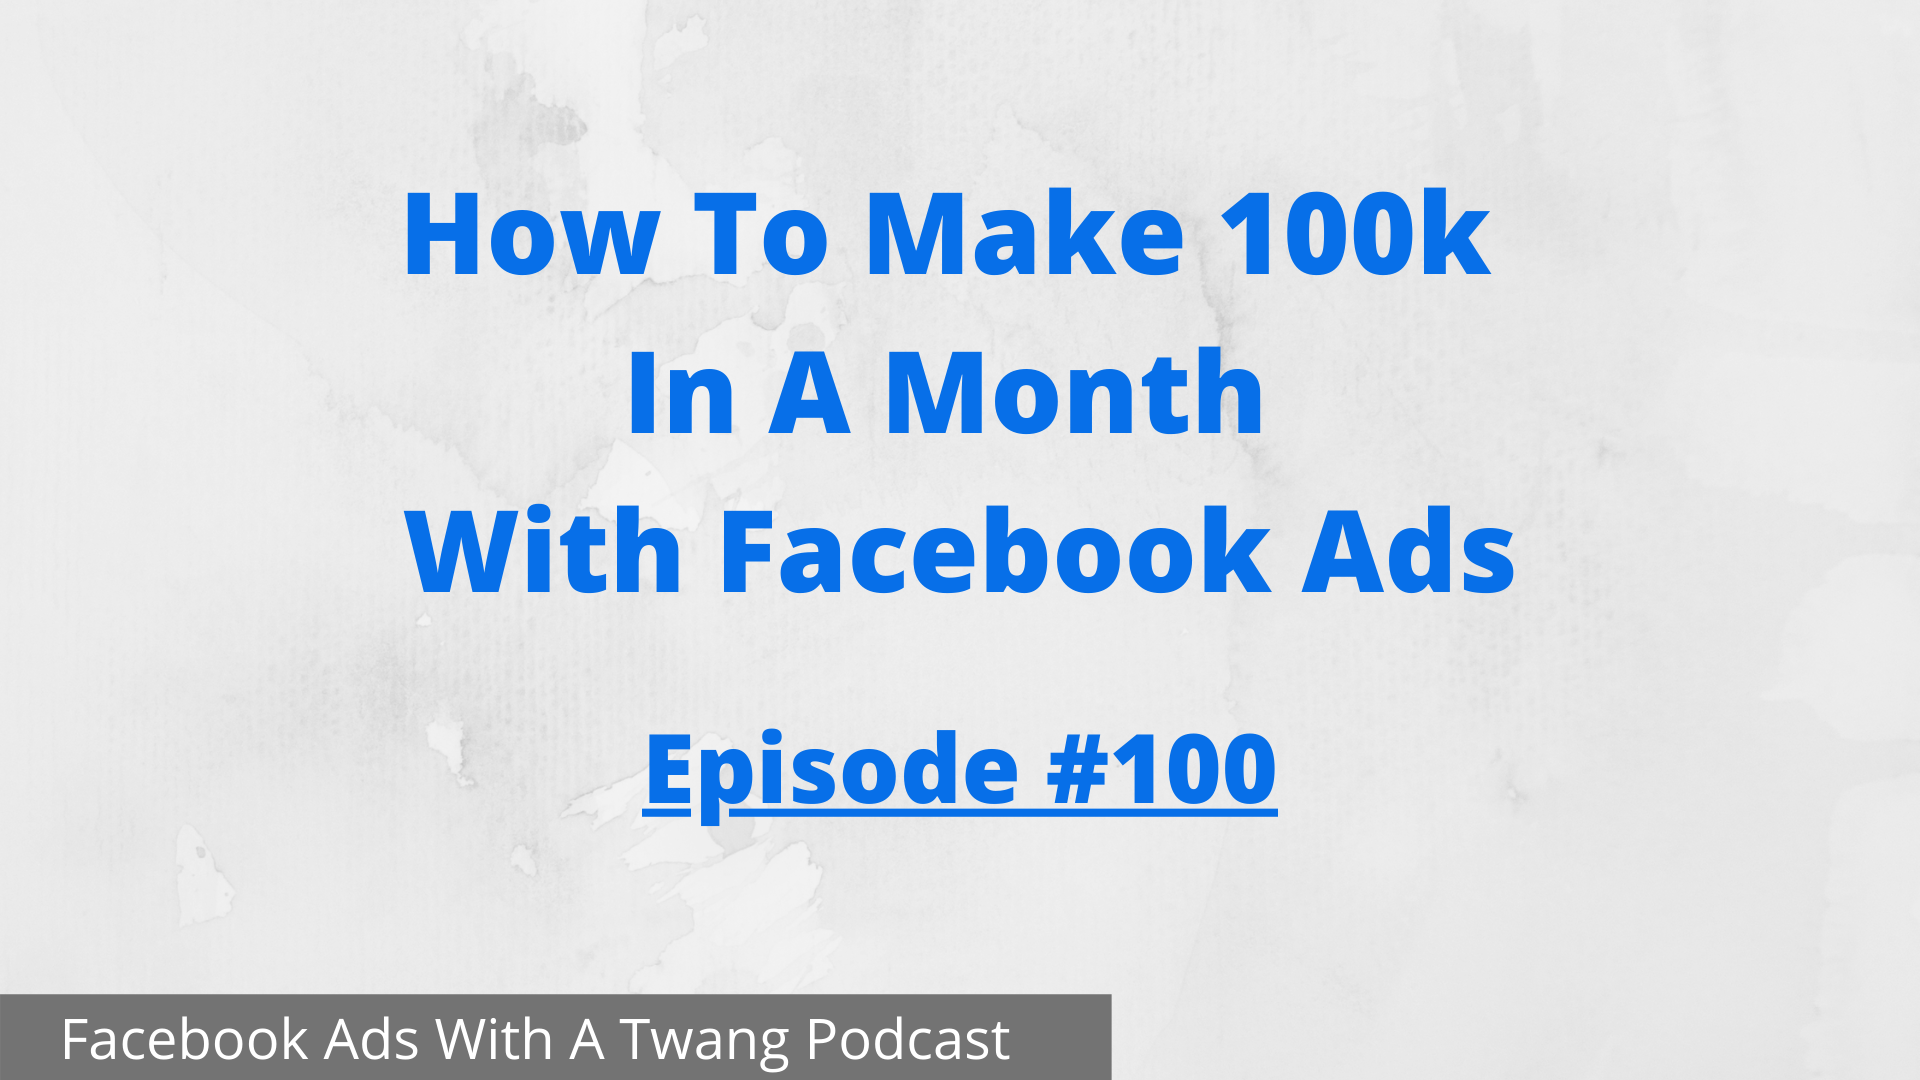 How To Make 100k In A Month With Facebook Ads